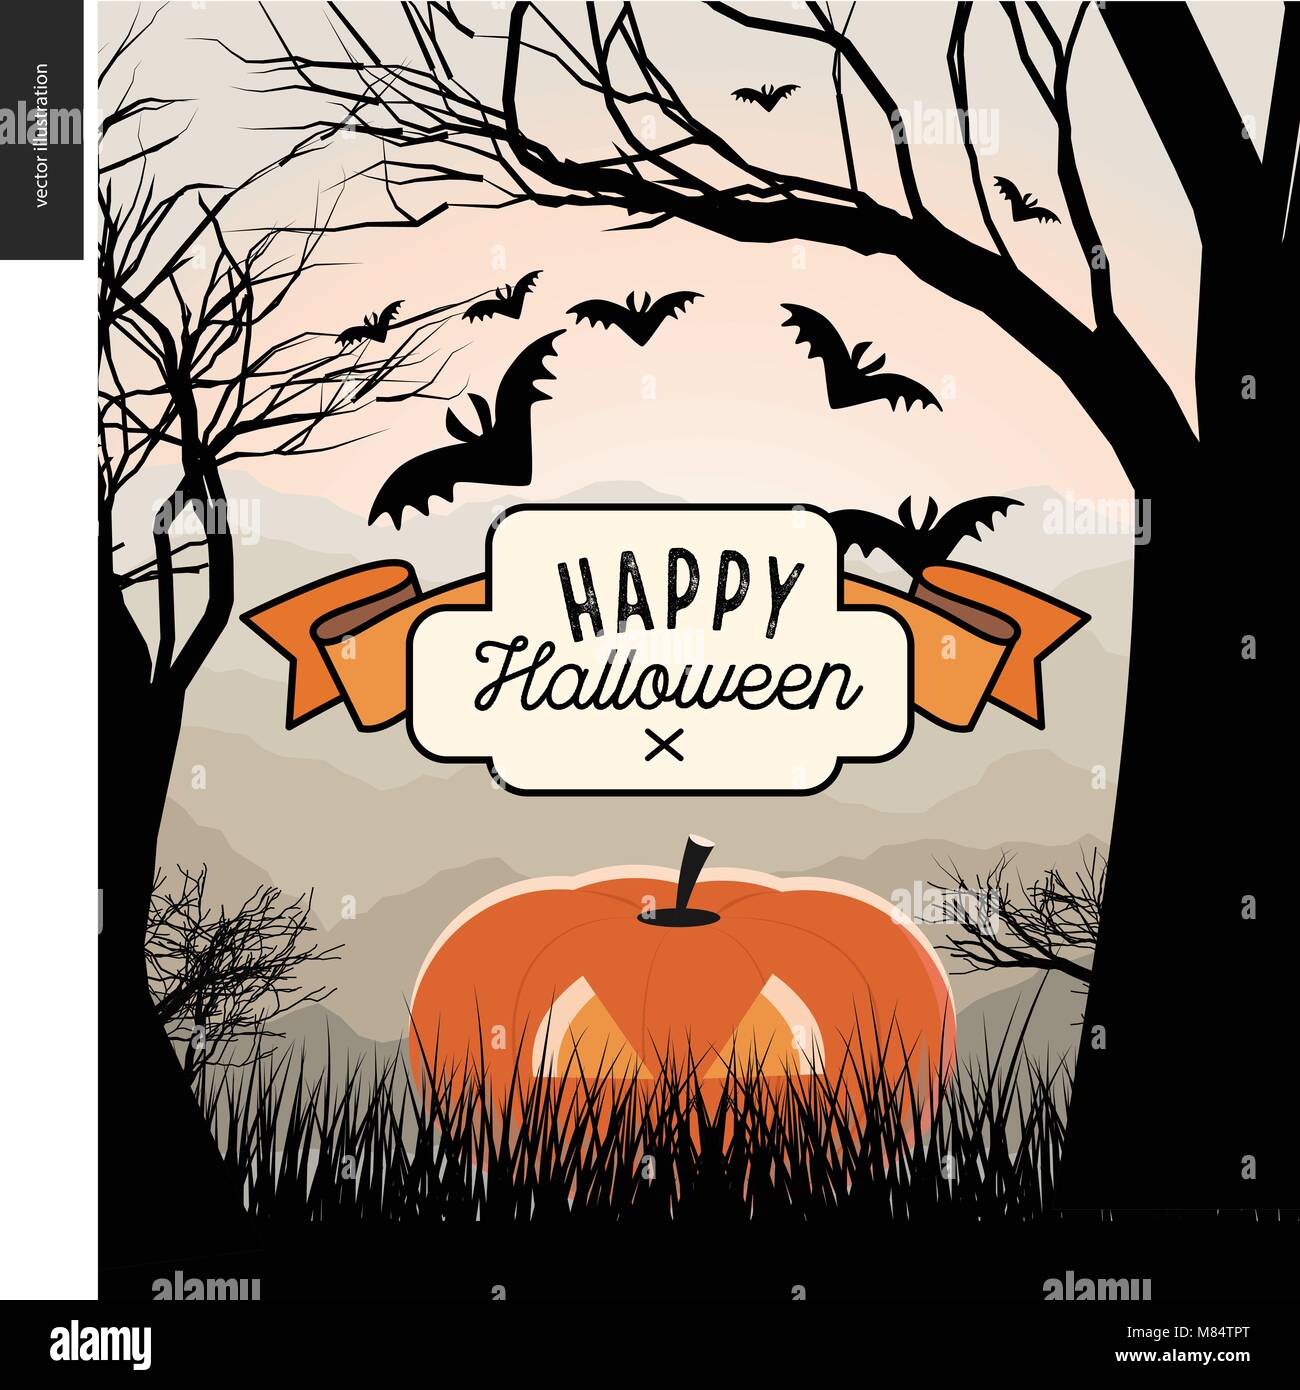 Happy Halloween illustrated poster. Vector cartoon illustration of a forest landscape with a pumpkin and flying bats, a black tree on foreground and l Stock Vector